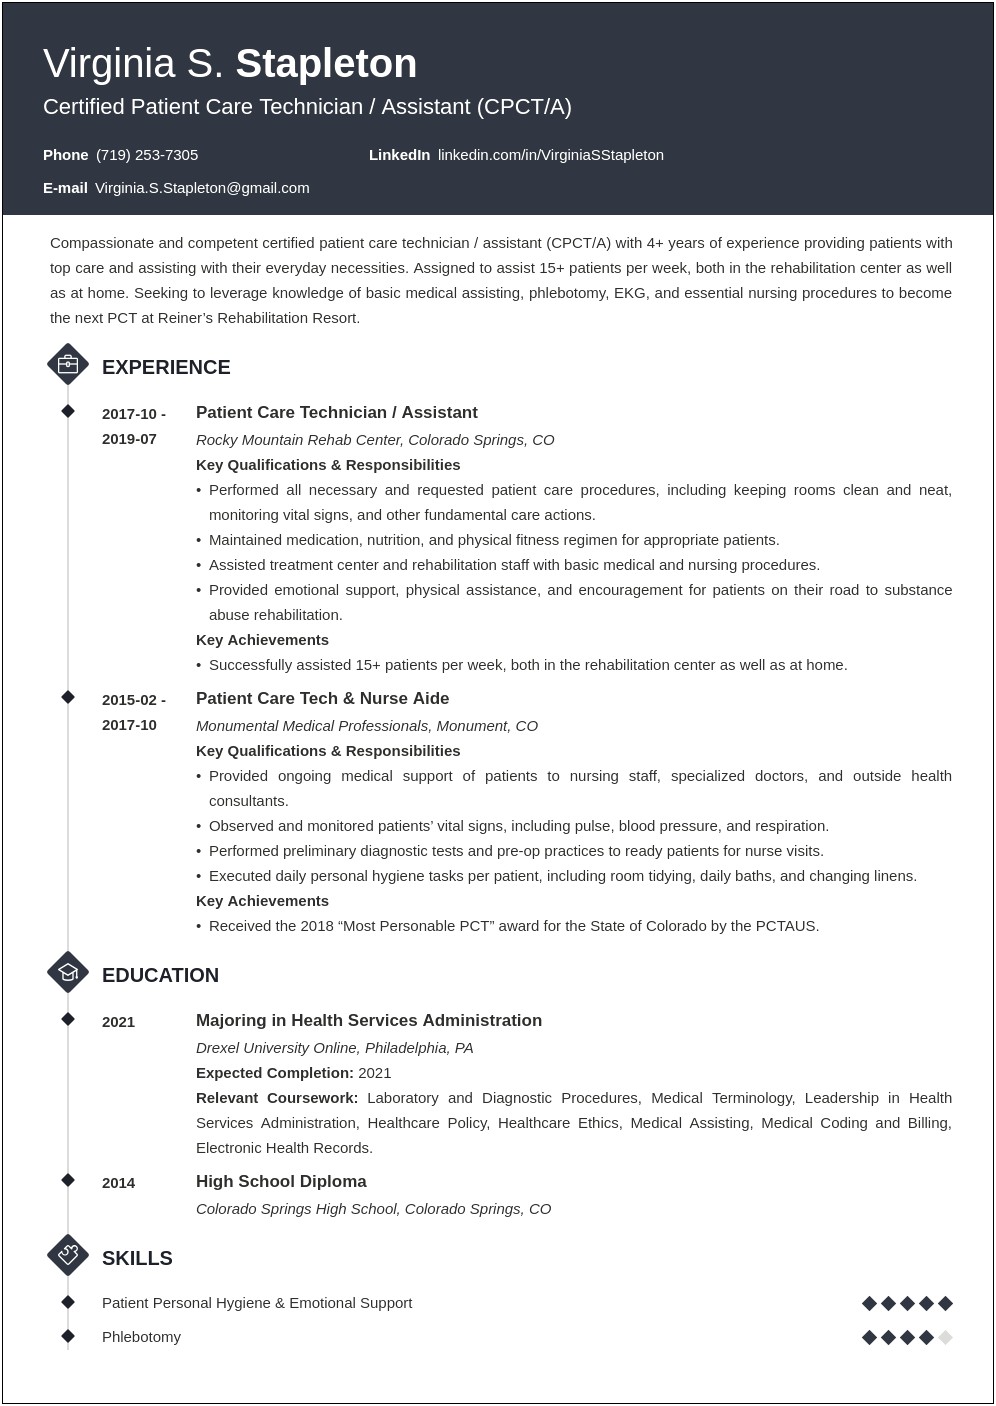 Resume Sample With Ptin Number